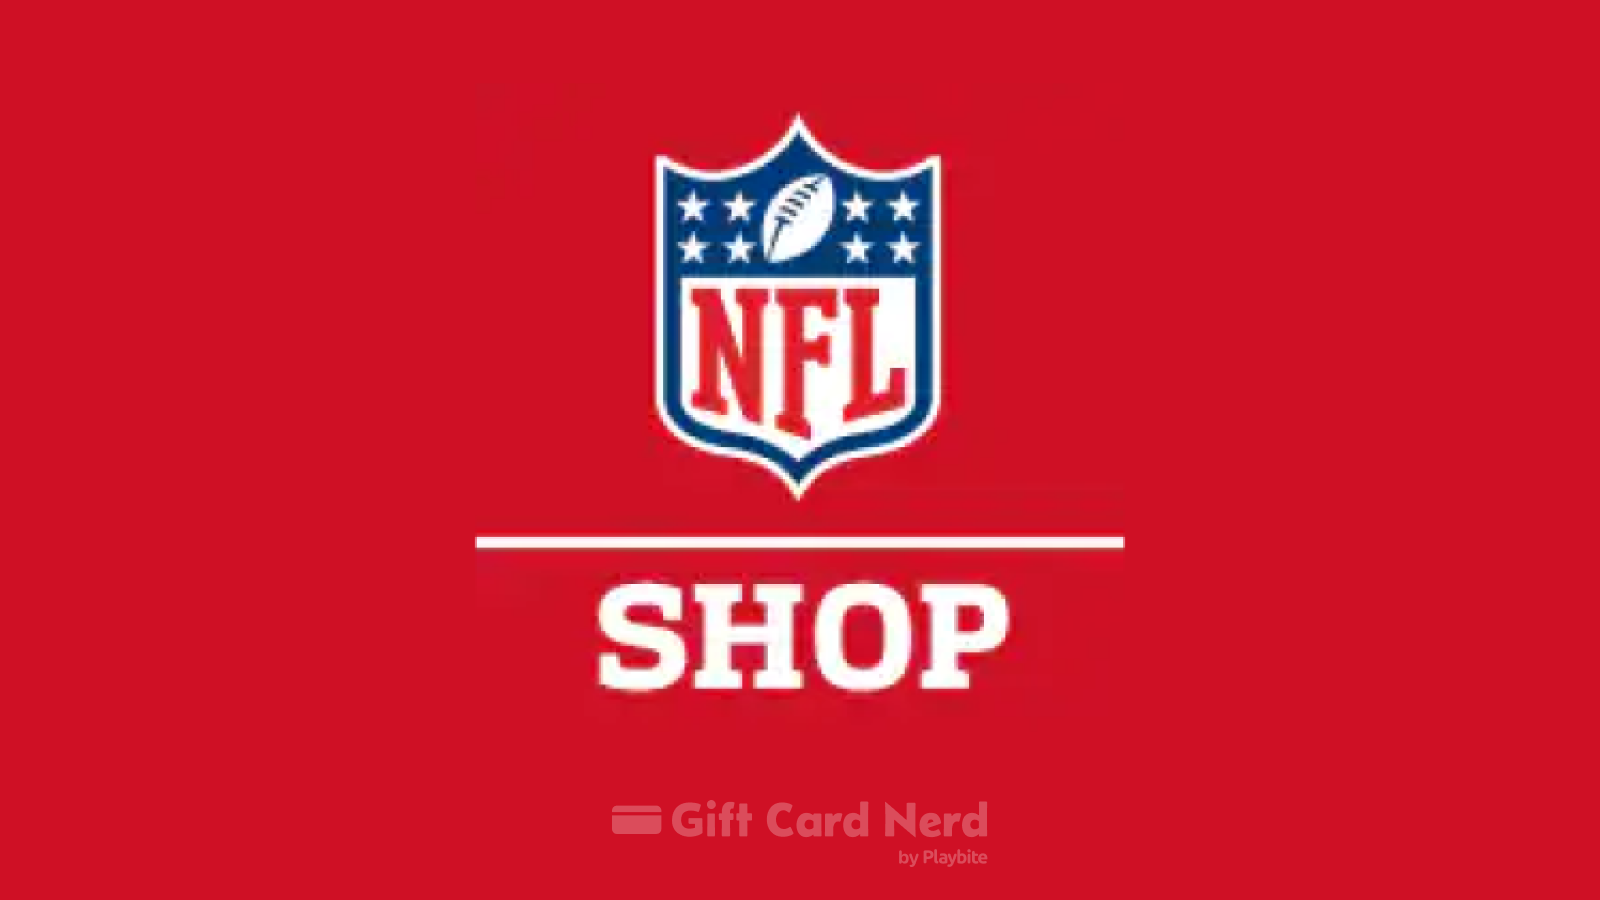 Where to Buy NFL Shop Gift Cards: Walmart Edition